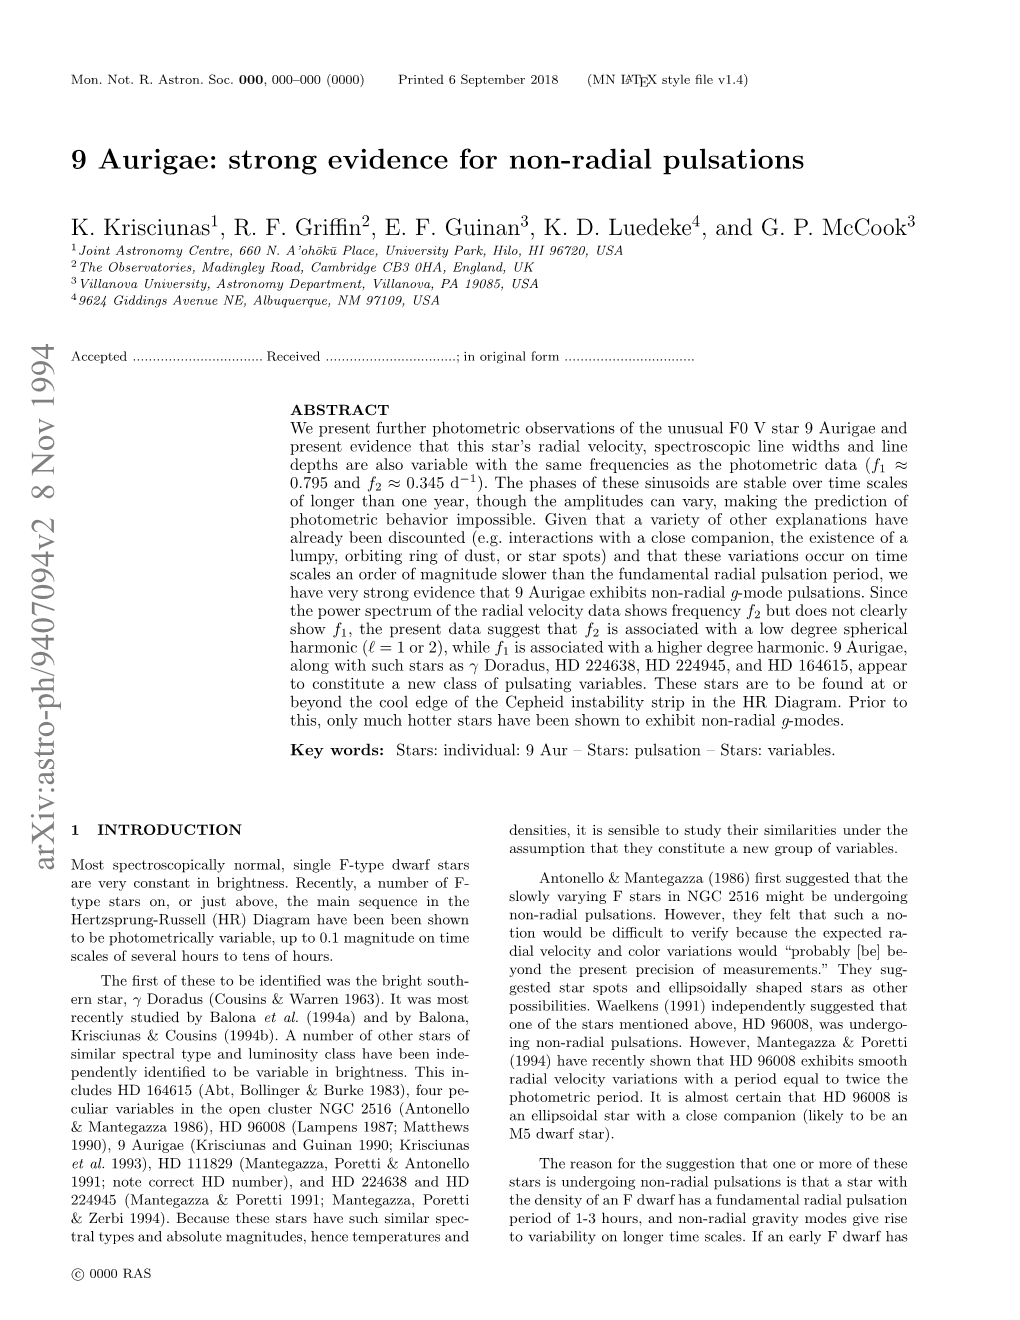 9 Aurigae: Strong Evidence for Non-Radial Pulsations 3